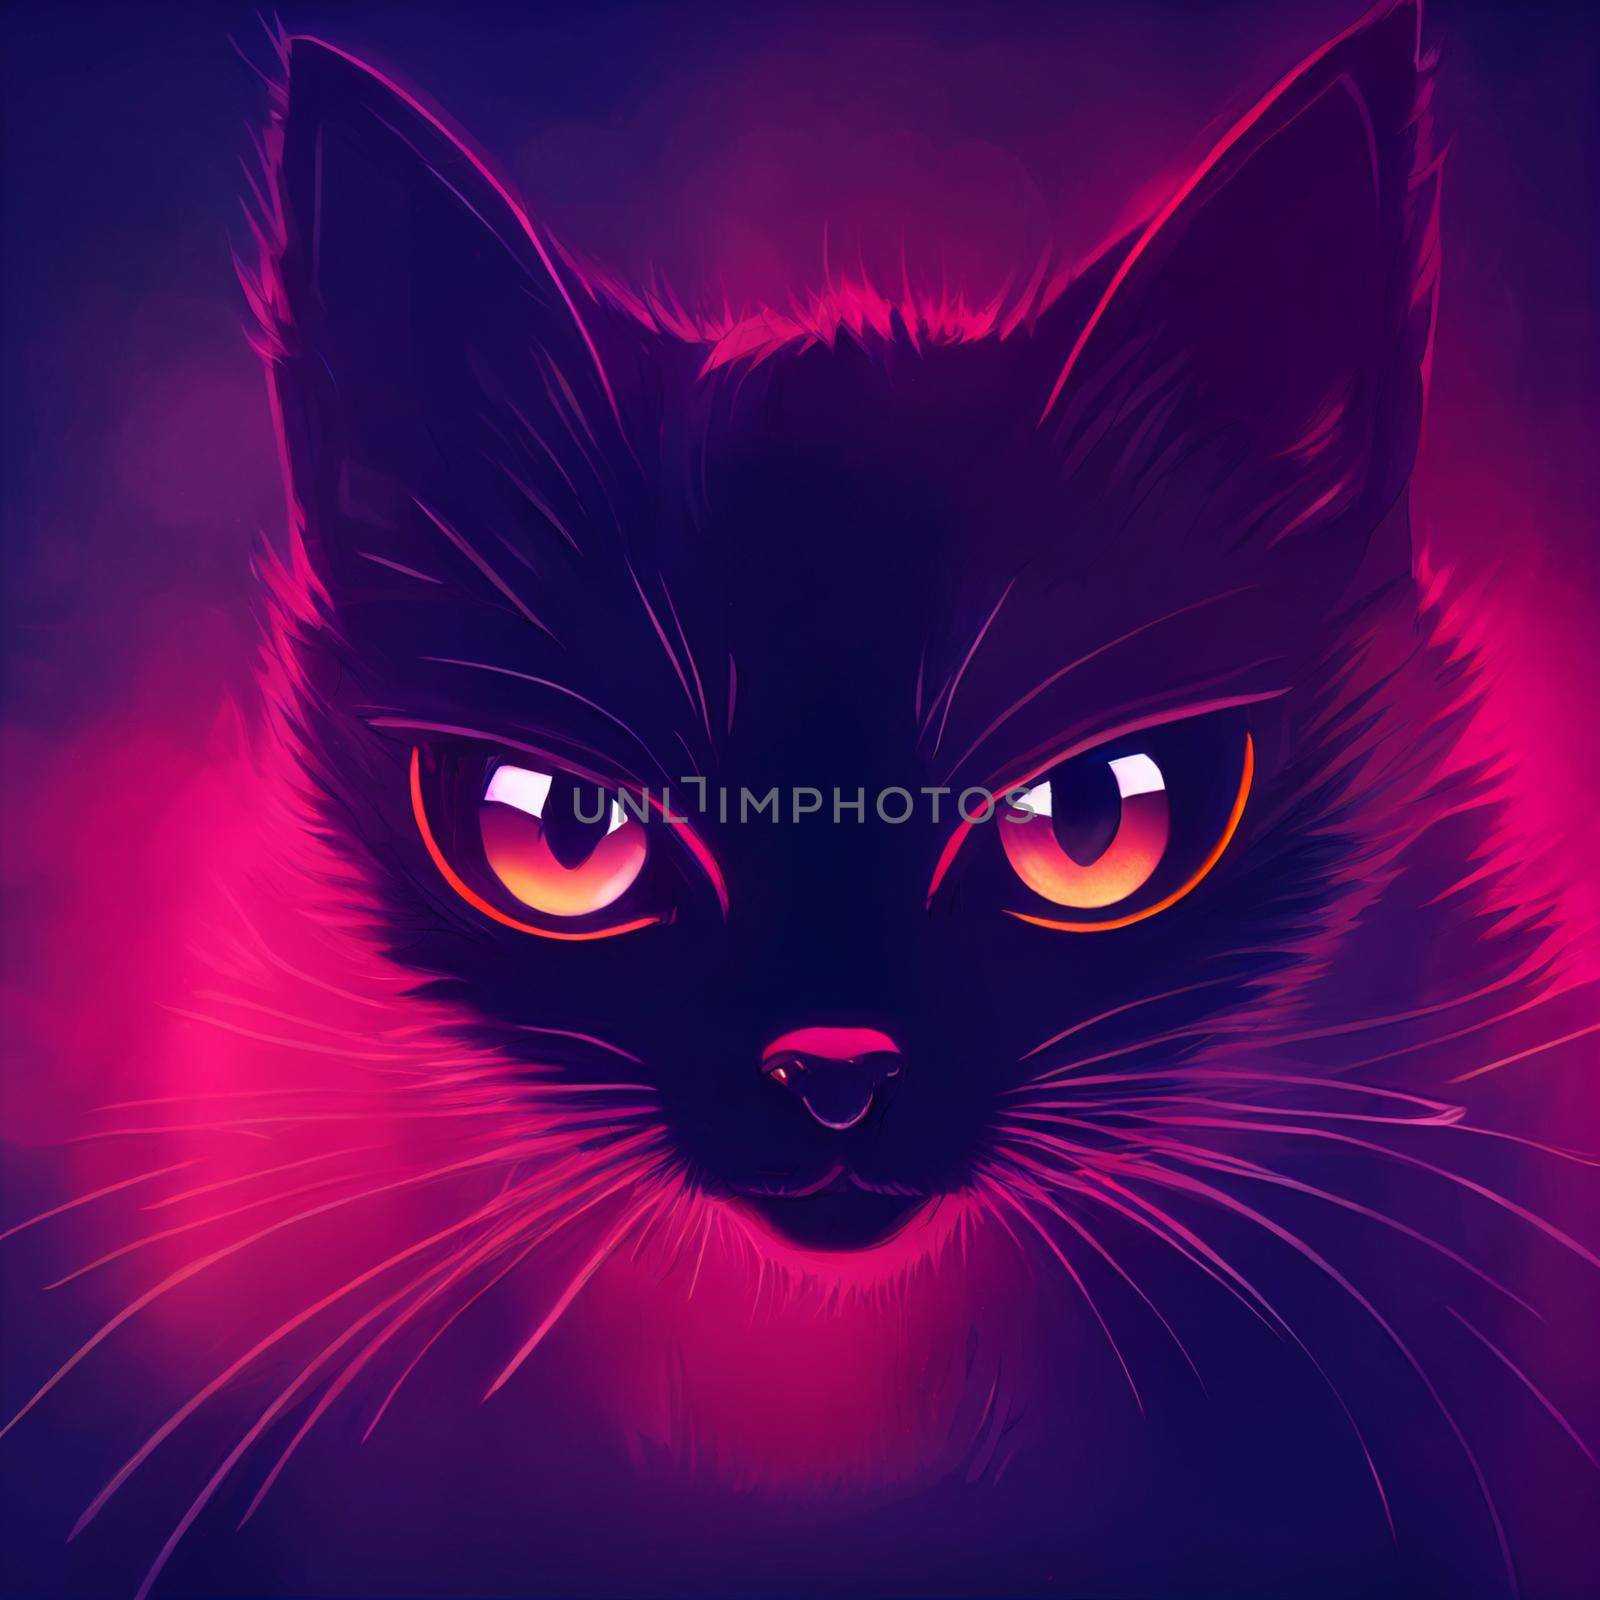 Illustration of a cat of a red eyes in purple light by NeuroSky